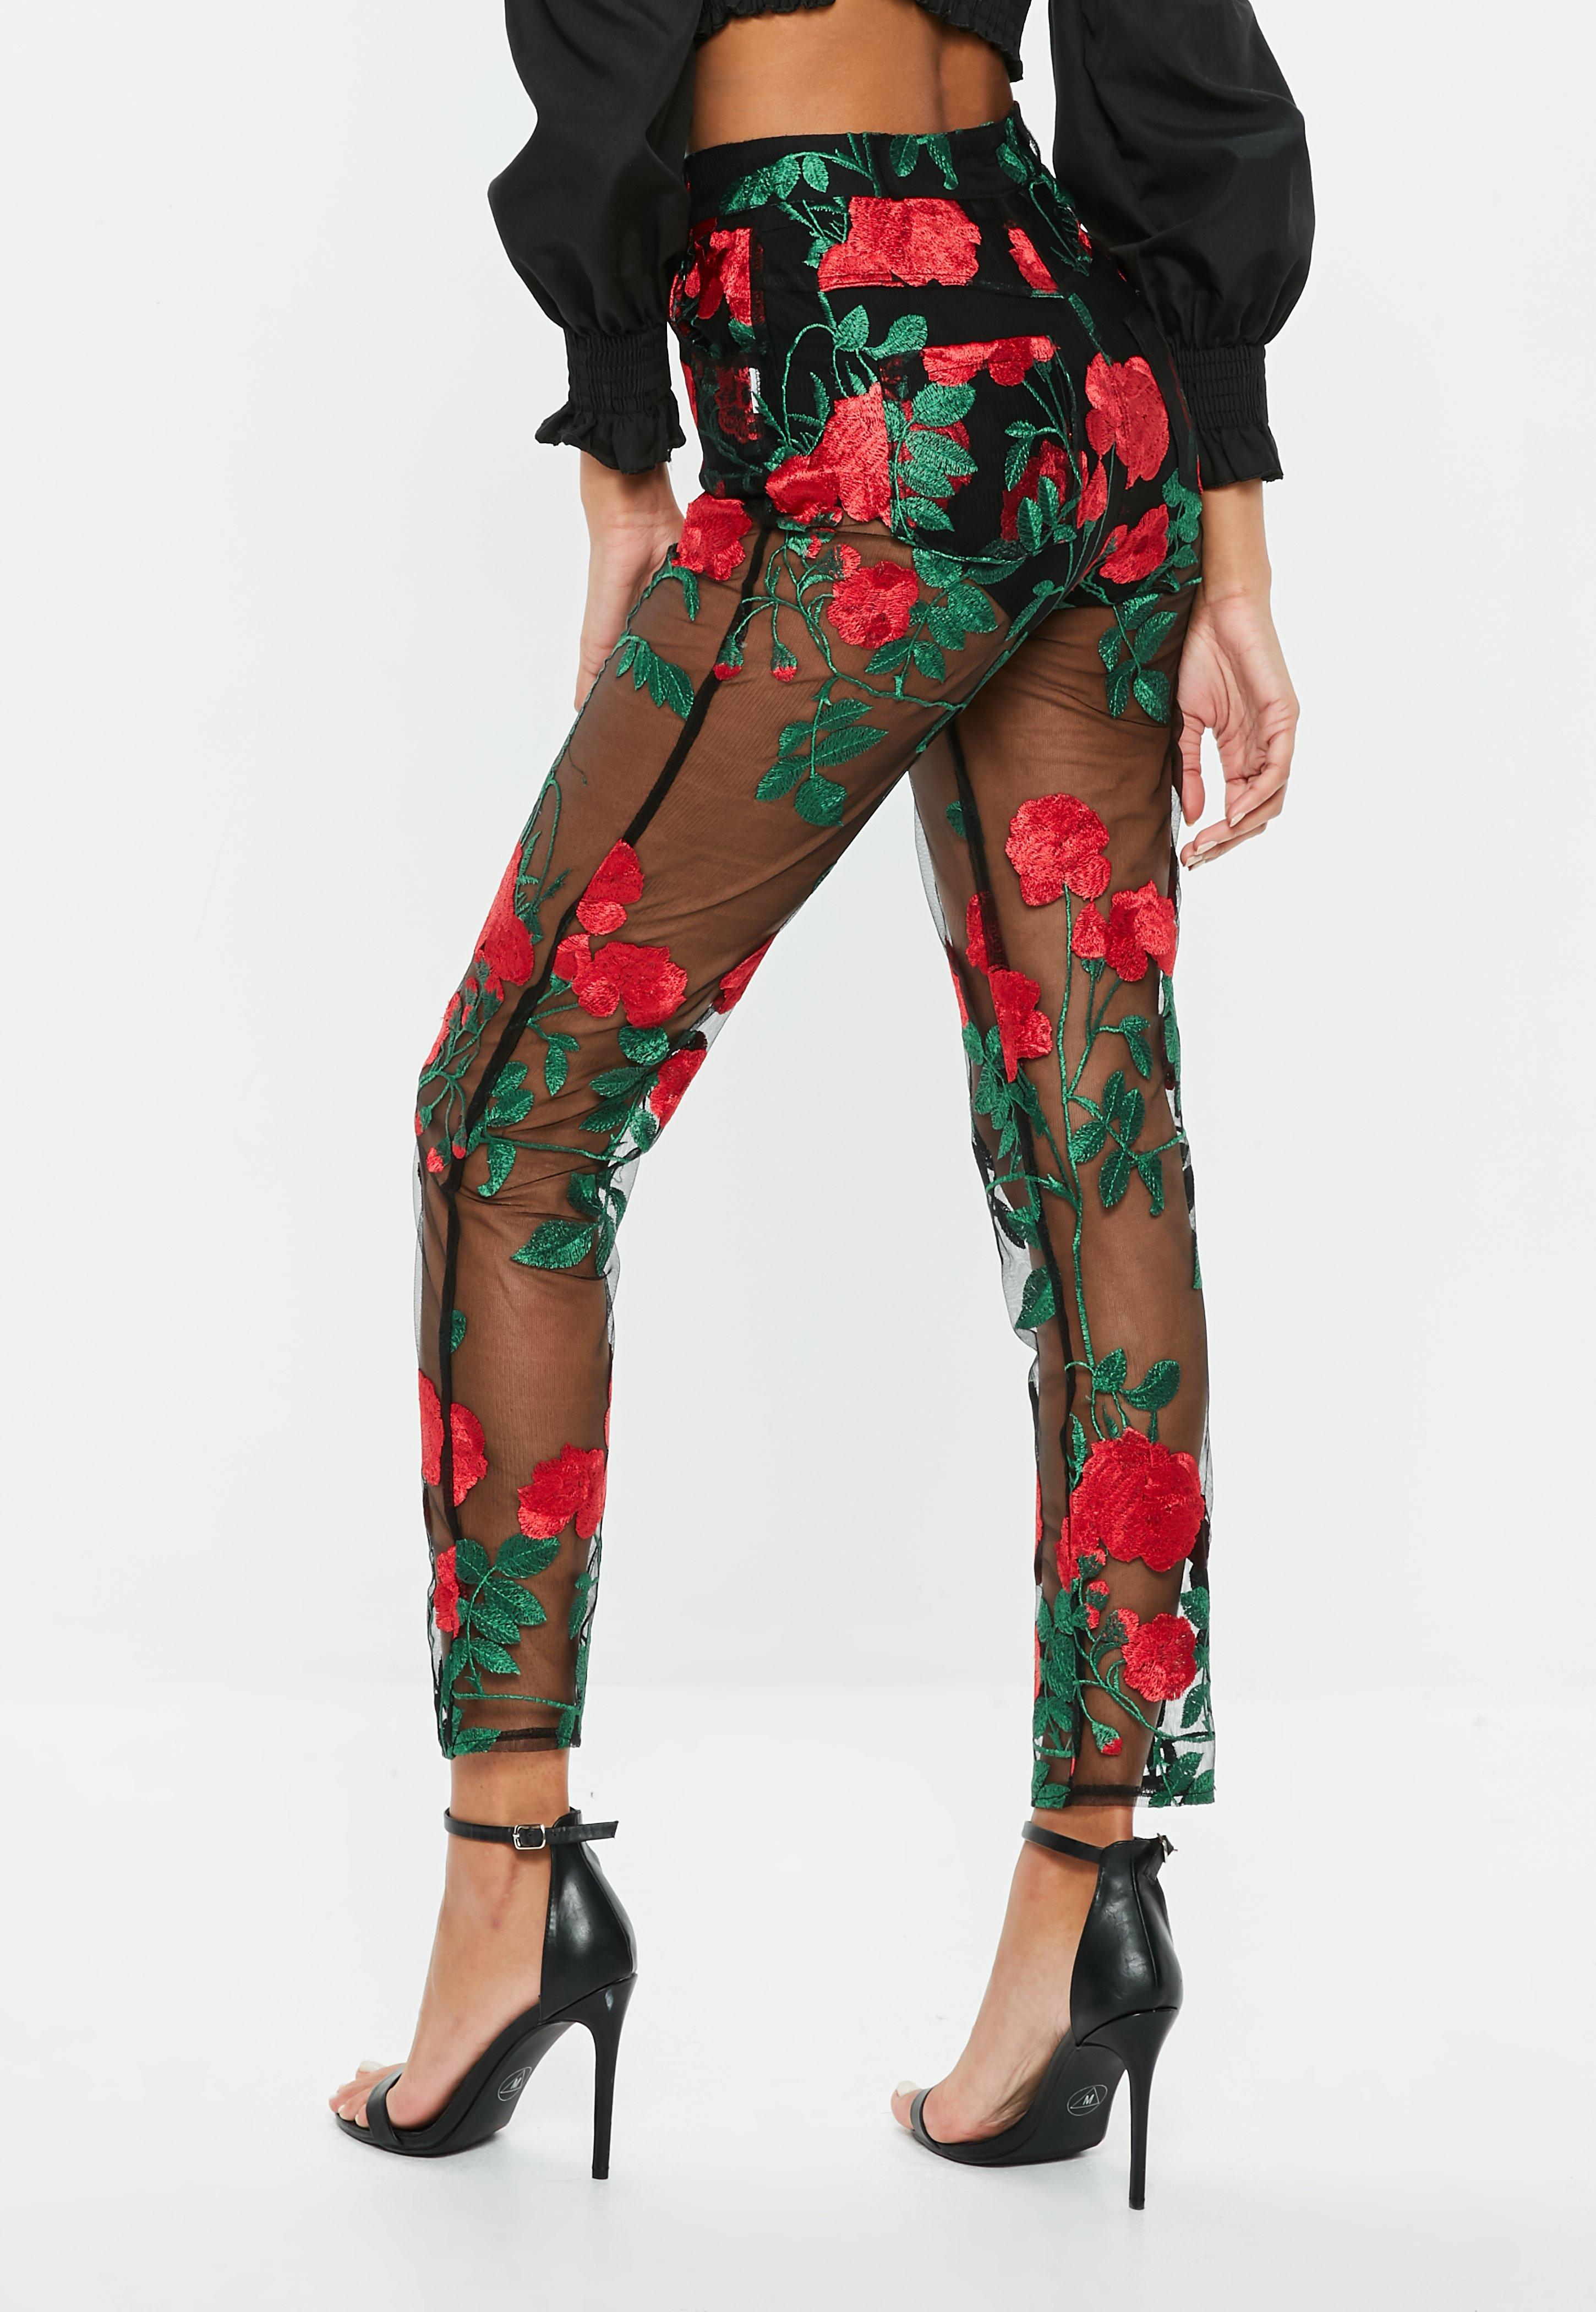 Lyst - Missguided Black Floral Embroidered Slim Leg Mesh Trousers in Black